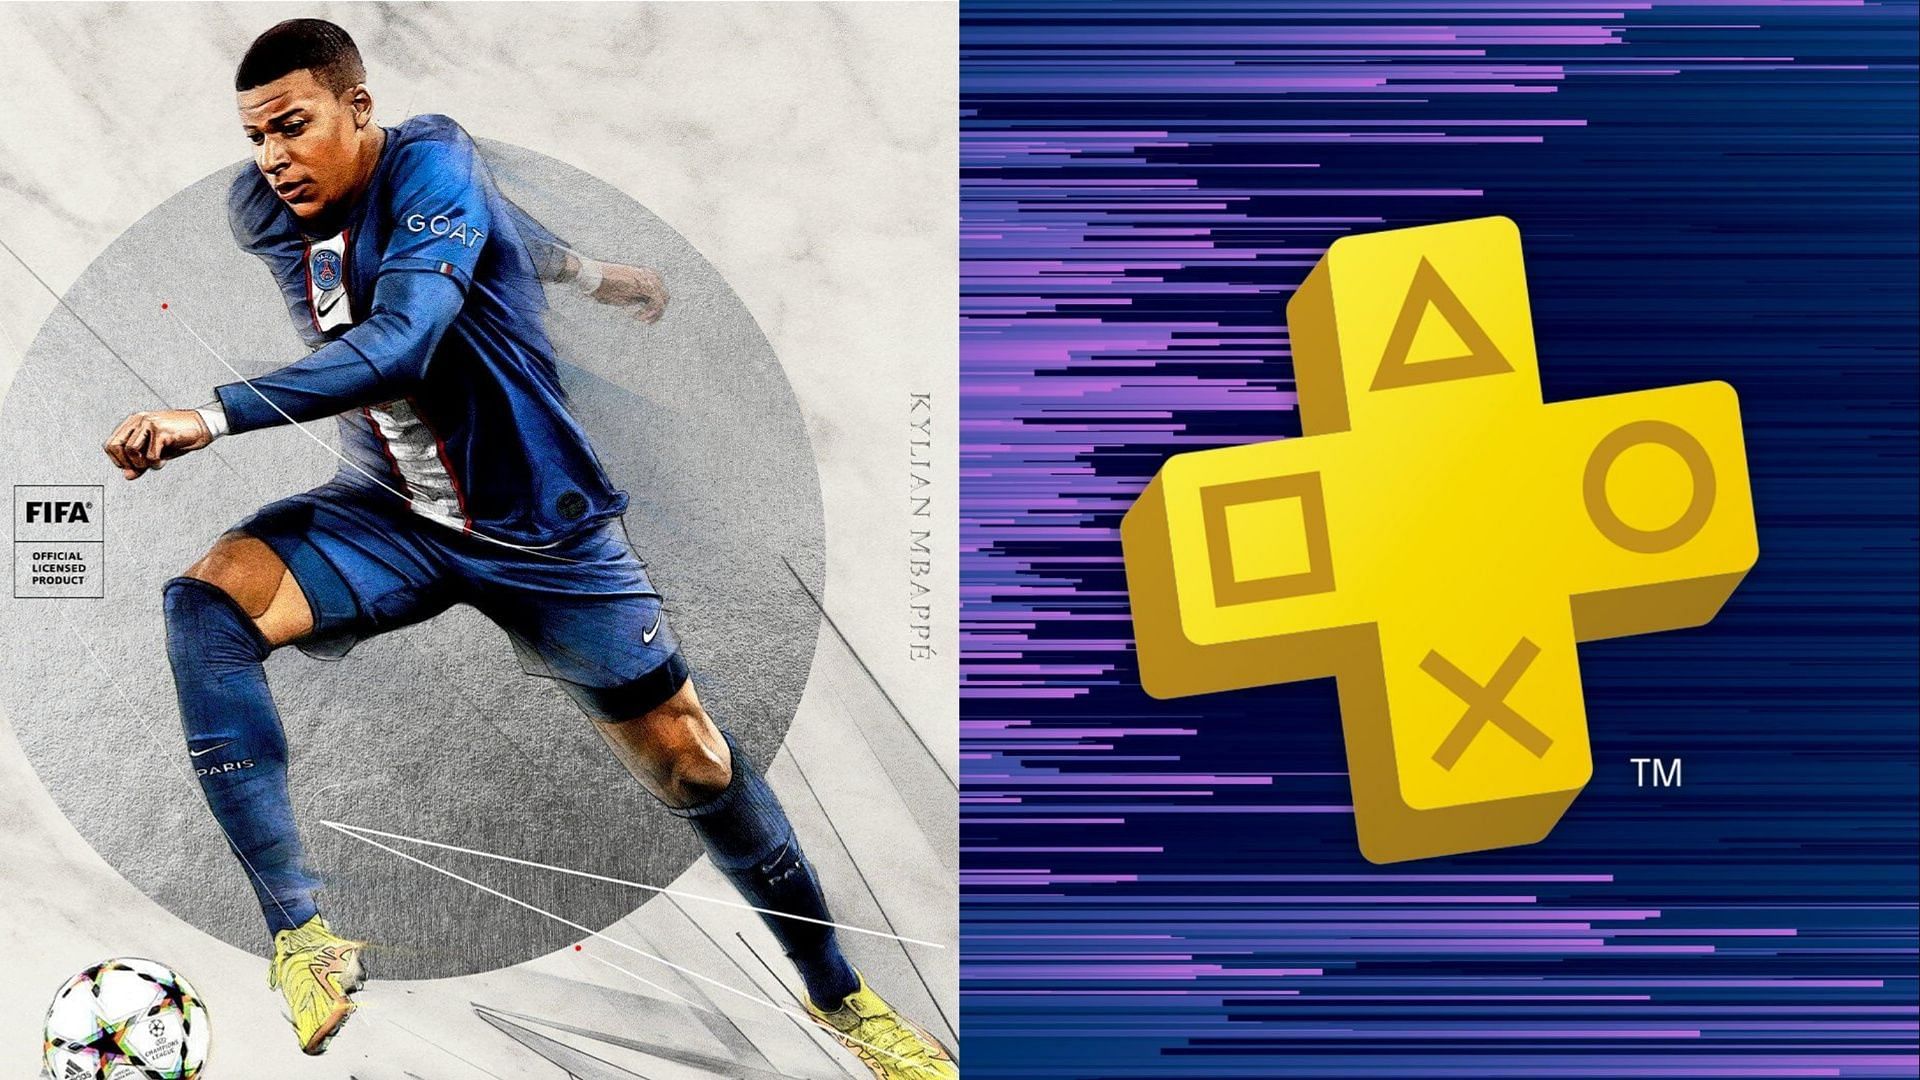 PS Plus: When could FIFA 23 be added to the PS Plus subscription? Expected release date and